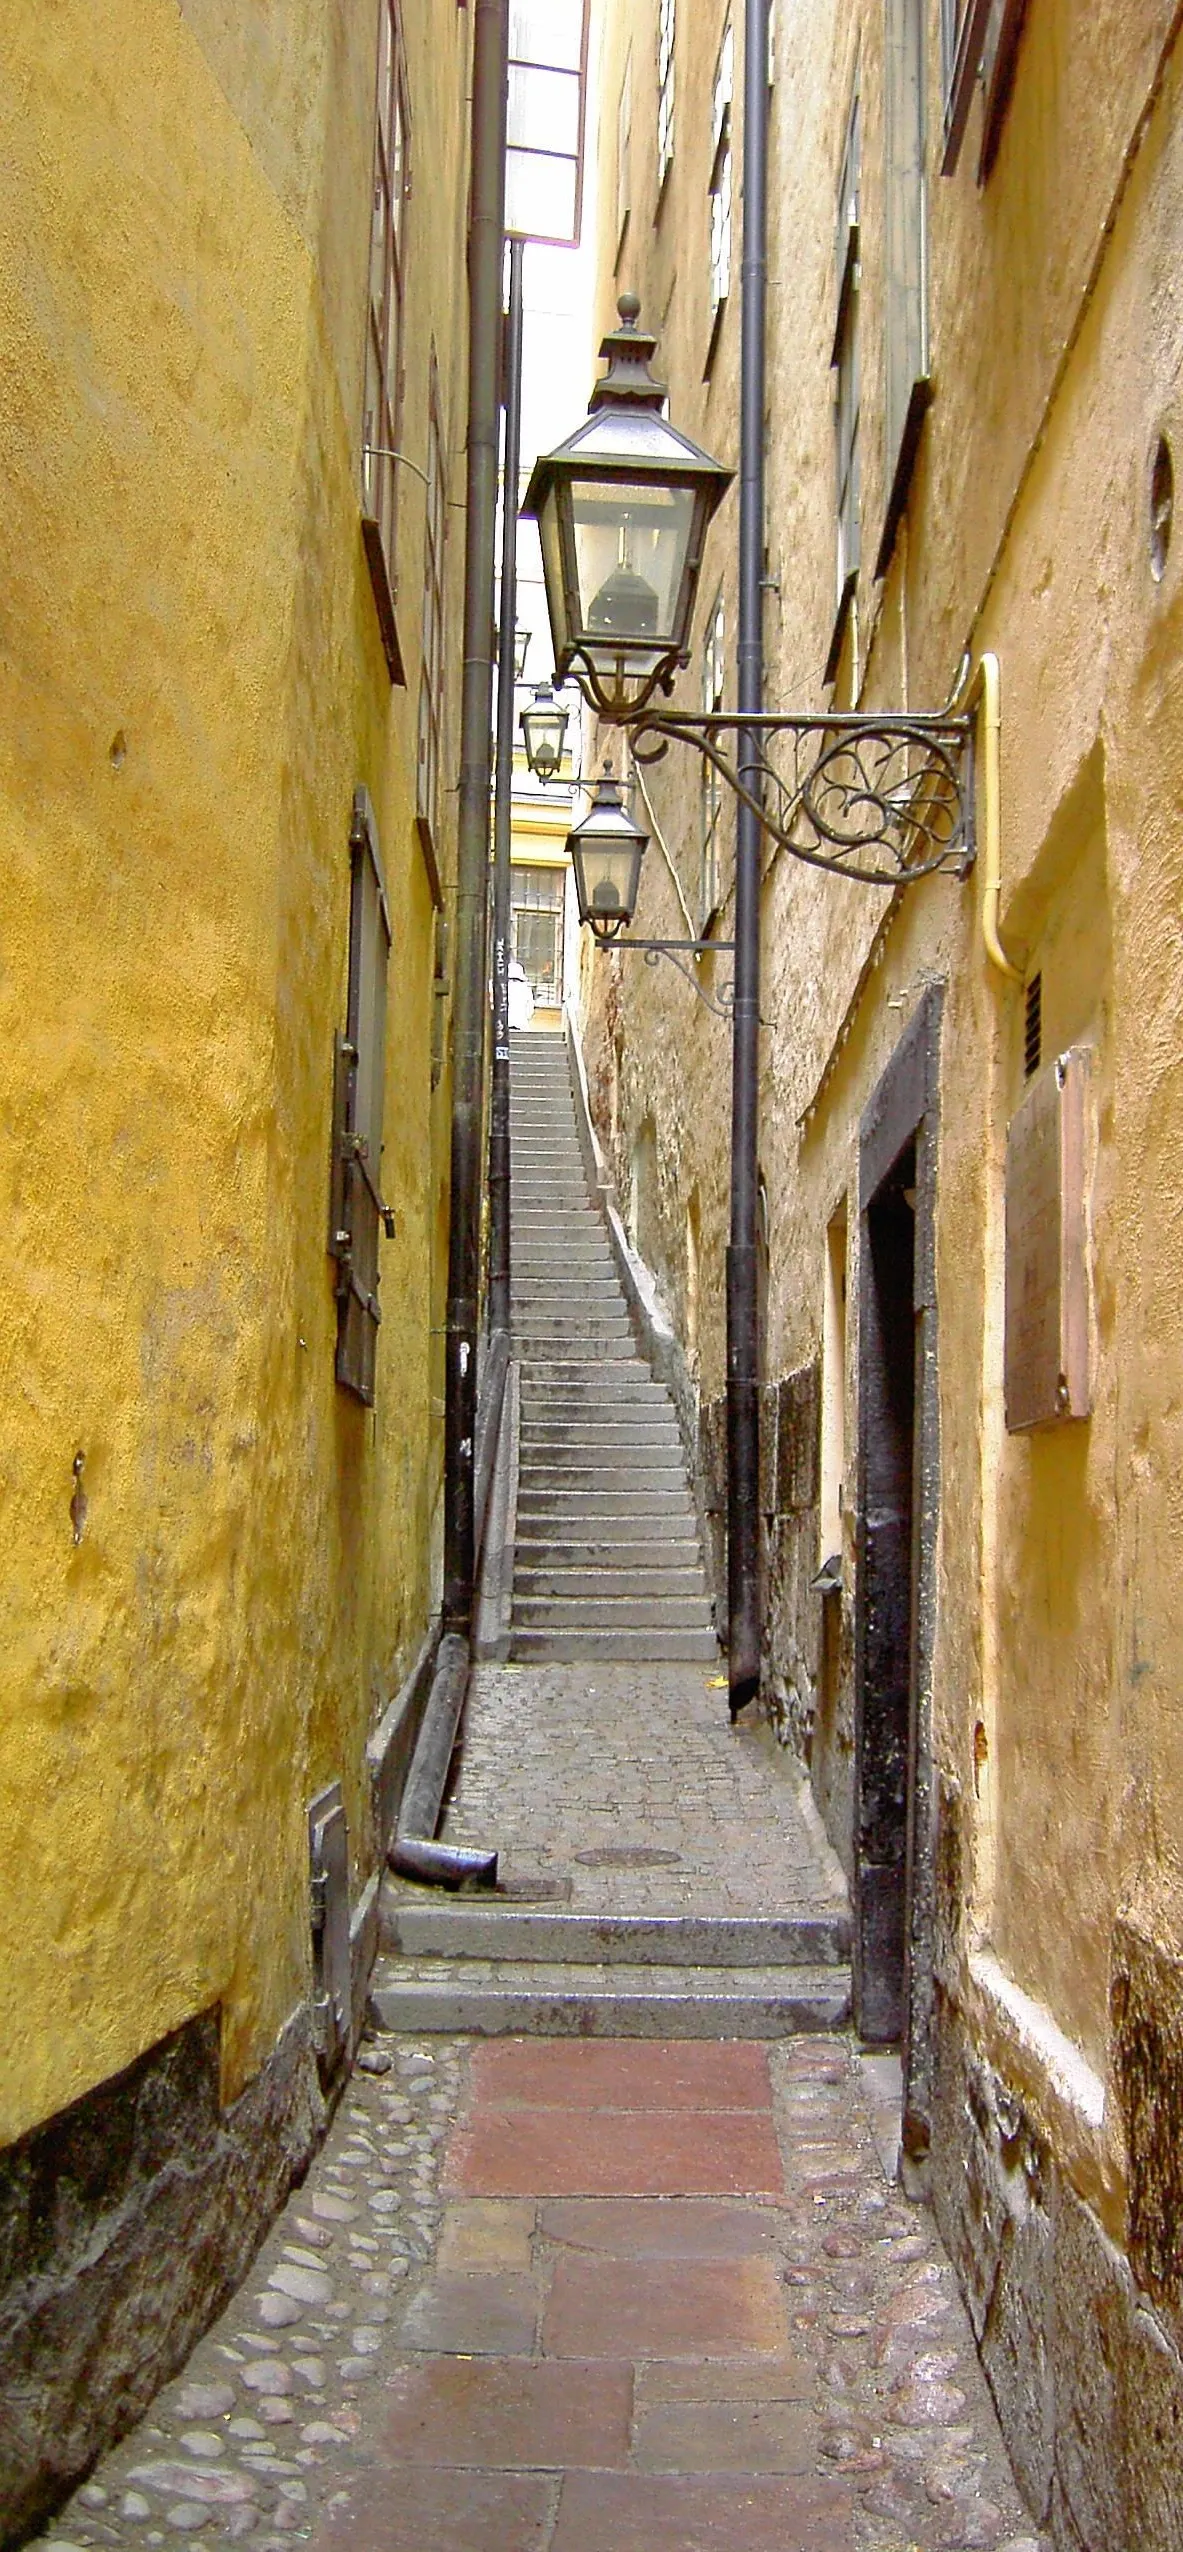 Photo showing: Mårten Trotzigs gränd (Swedish: "Alley of Mårten Trotzig") is the narrowest street in Stockholm, Sweden. It's situated in Gamla stan ("Old town"), the oldest part of the city. The actual age of the alley is unknown, but it was mentioned in 1544 as Tronge trappe grenden (in modern Swedish Trånga trappgränden, i.e. "Narrow Stairs Alley."). It's approximately 30 metres (98 ft) long and 90 centimetres (35 in) wide.